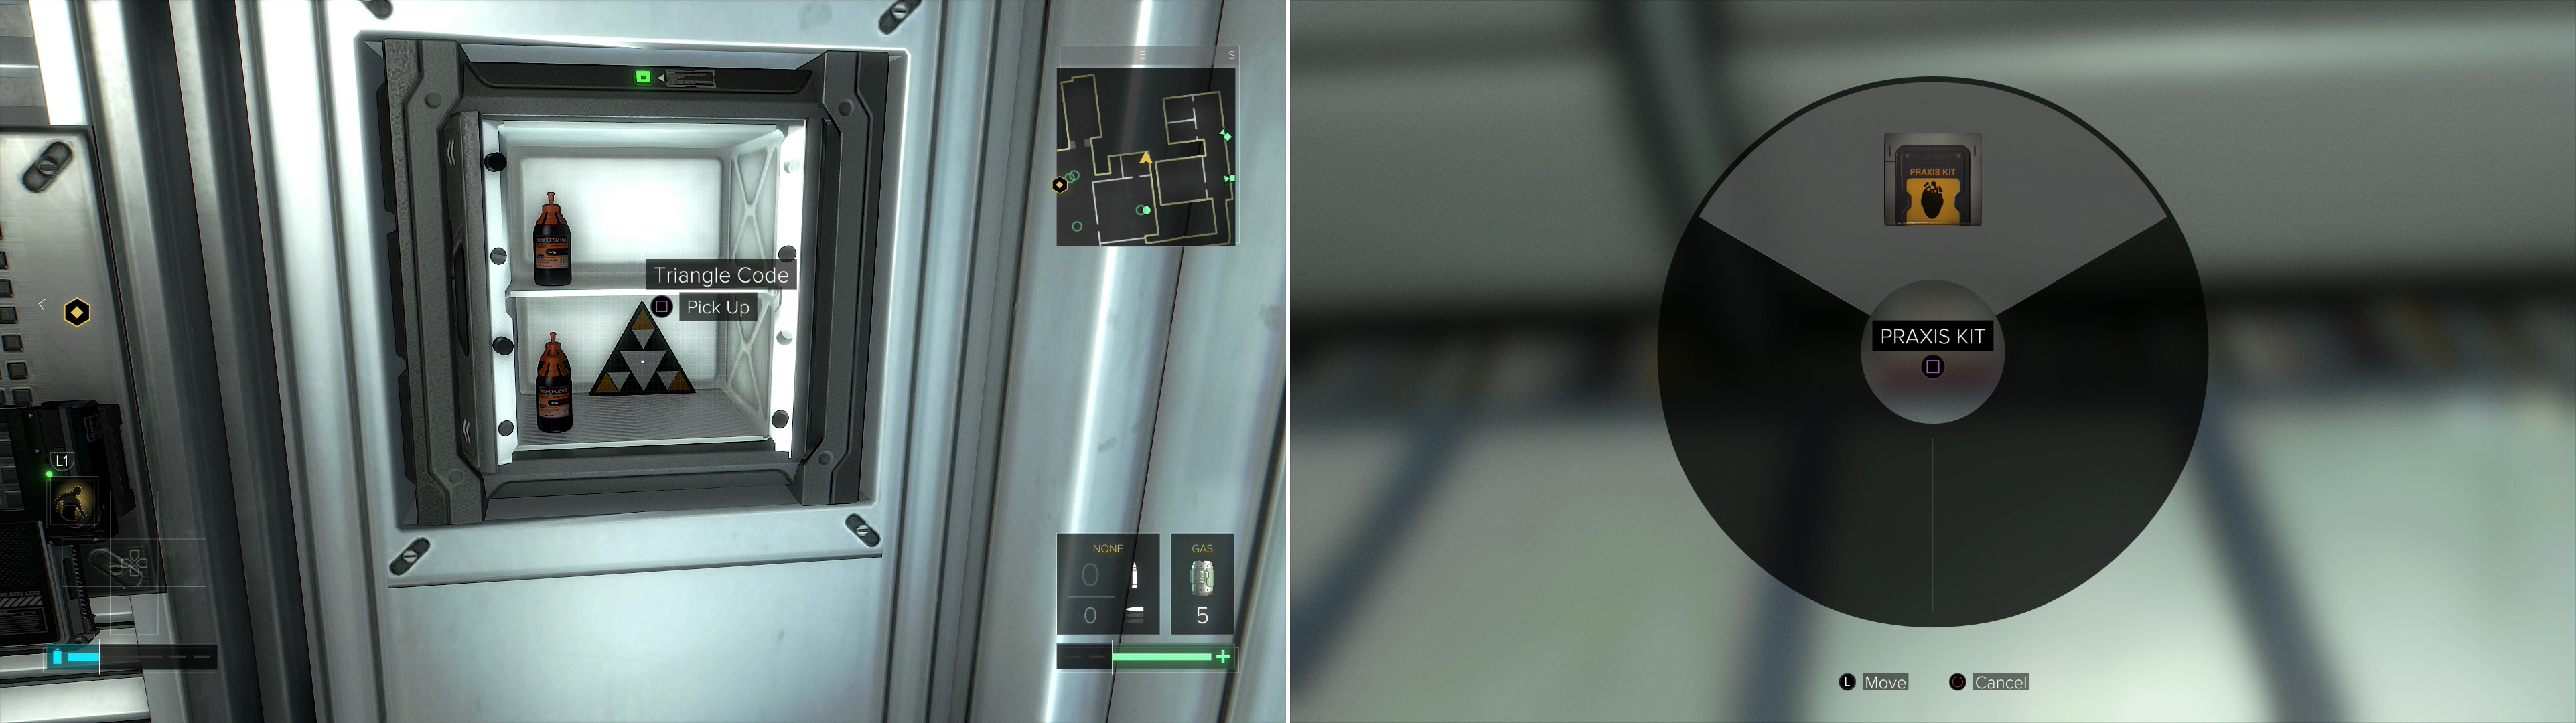 In TF29’s Infirmary you can open a safe to find goodies, including Neuropozyne and Triangle Code #9 (left). You can also search a Medical Box on top of a cabinet to find a Praxis Kit (right).